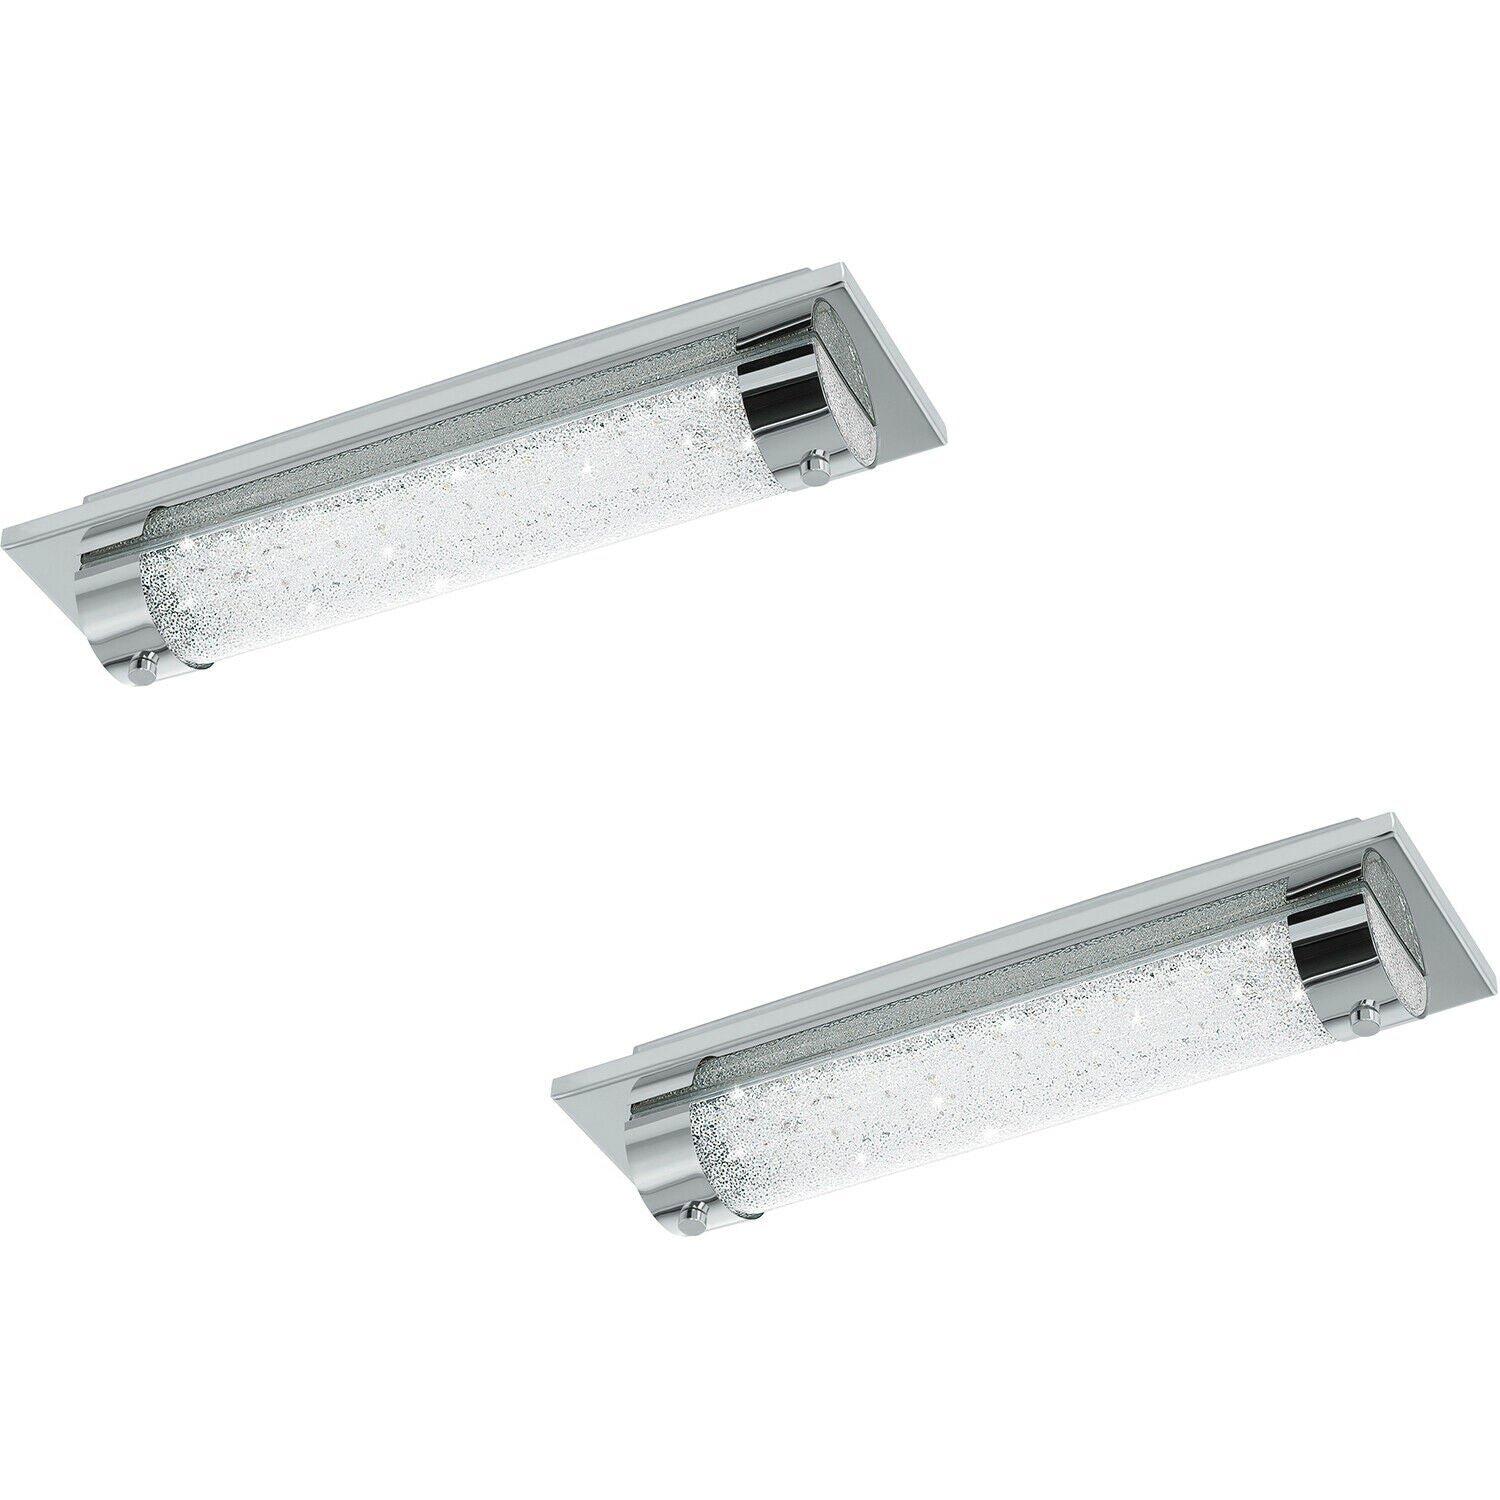 2 PACK Wall Flush Ceiling Light Colour Chrome Shade Clear Plastic Crystal LED 8W